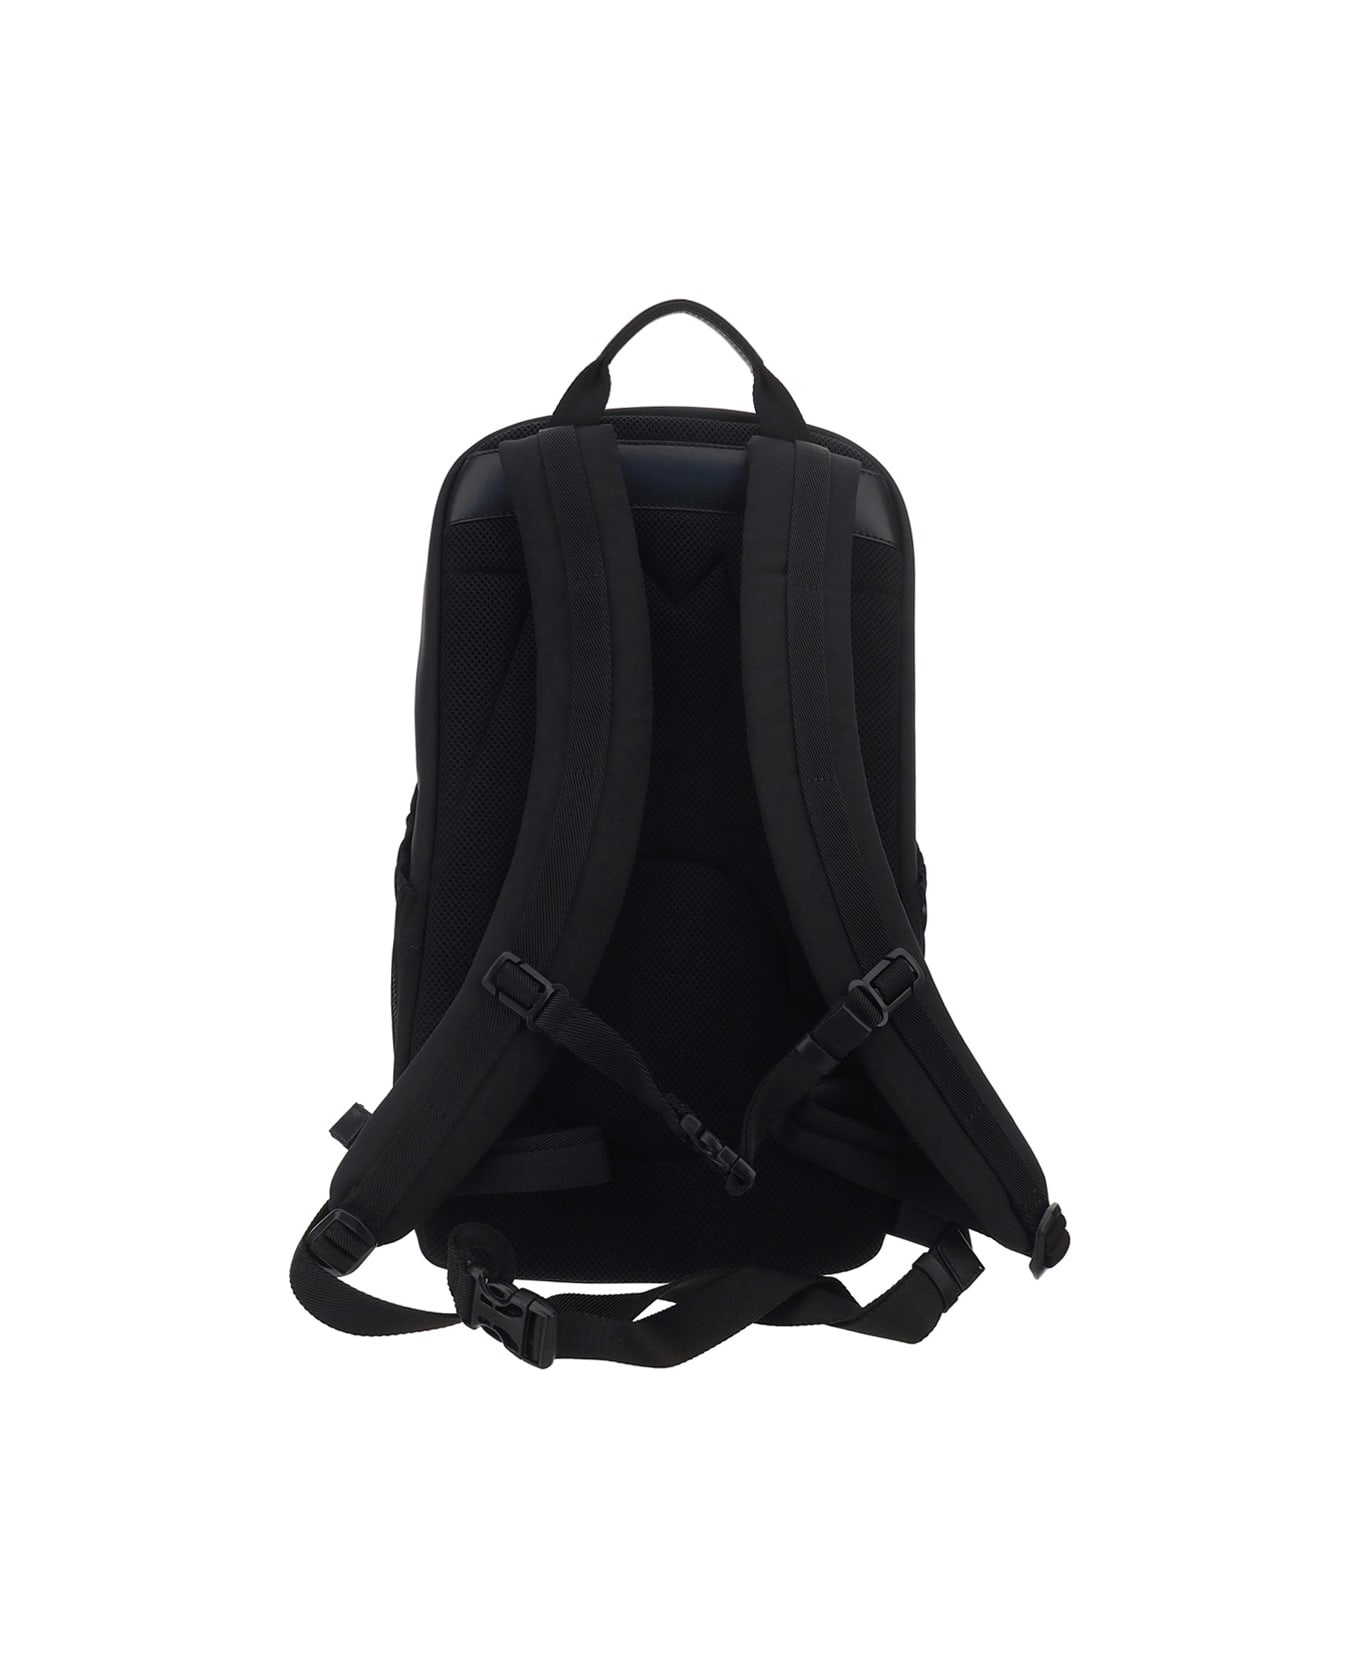 Moncler Cut Backpack - Nero